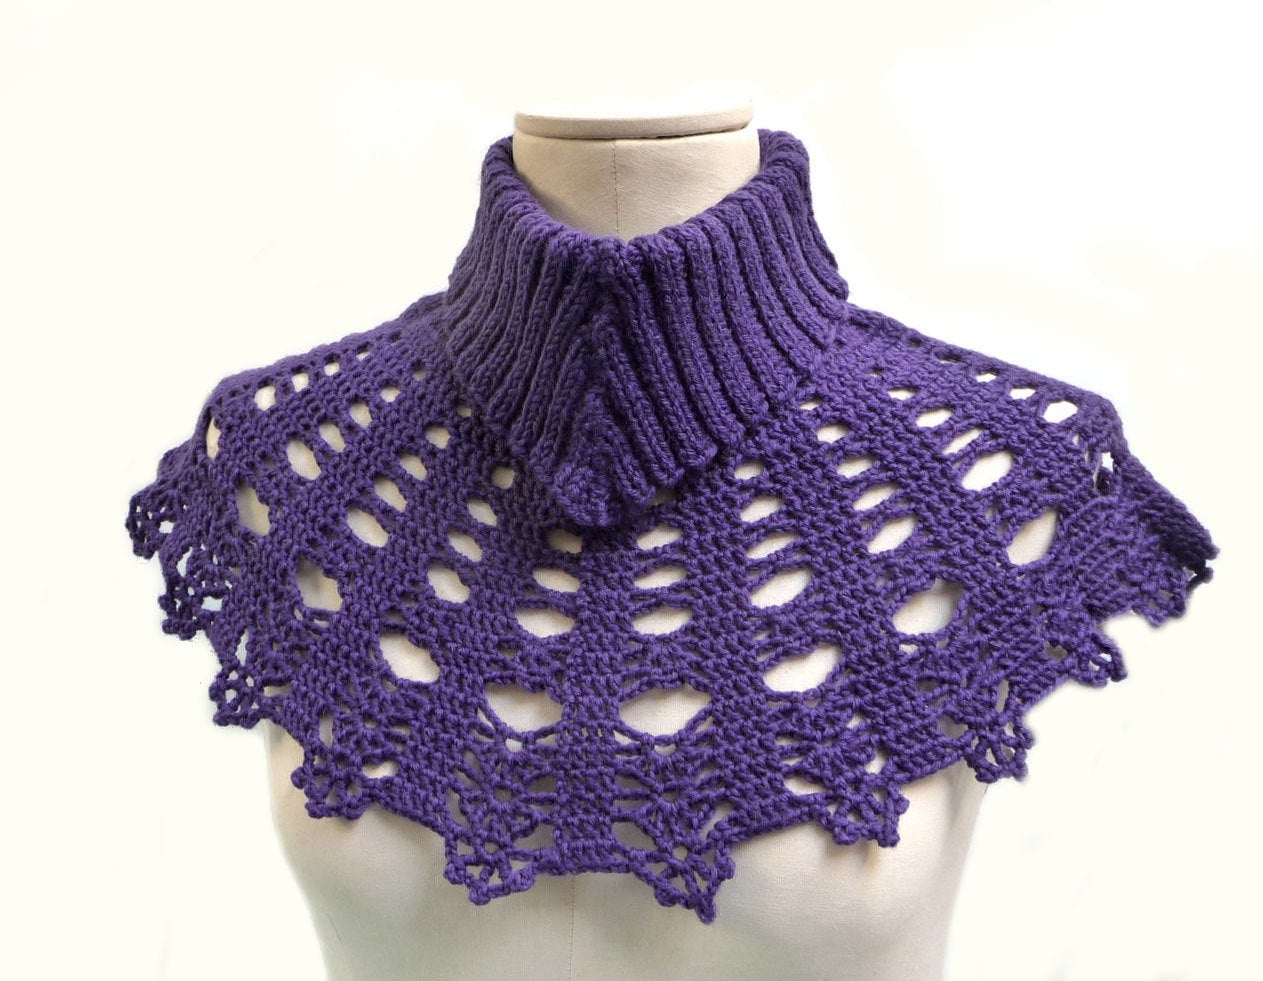 Ultra Violet Capelet with Knit Turtleneck and Crochet Bib Collar, Plum Purple Cape for Women, Wool Poncho Neck Warmer, Mother Day Gift Idea